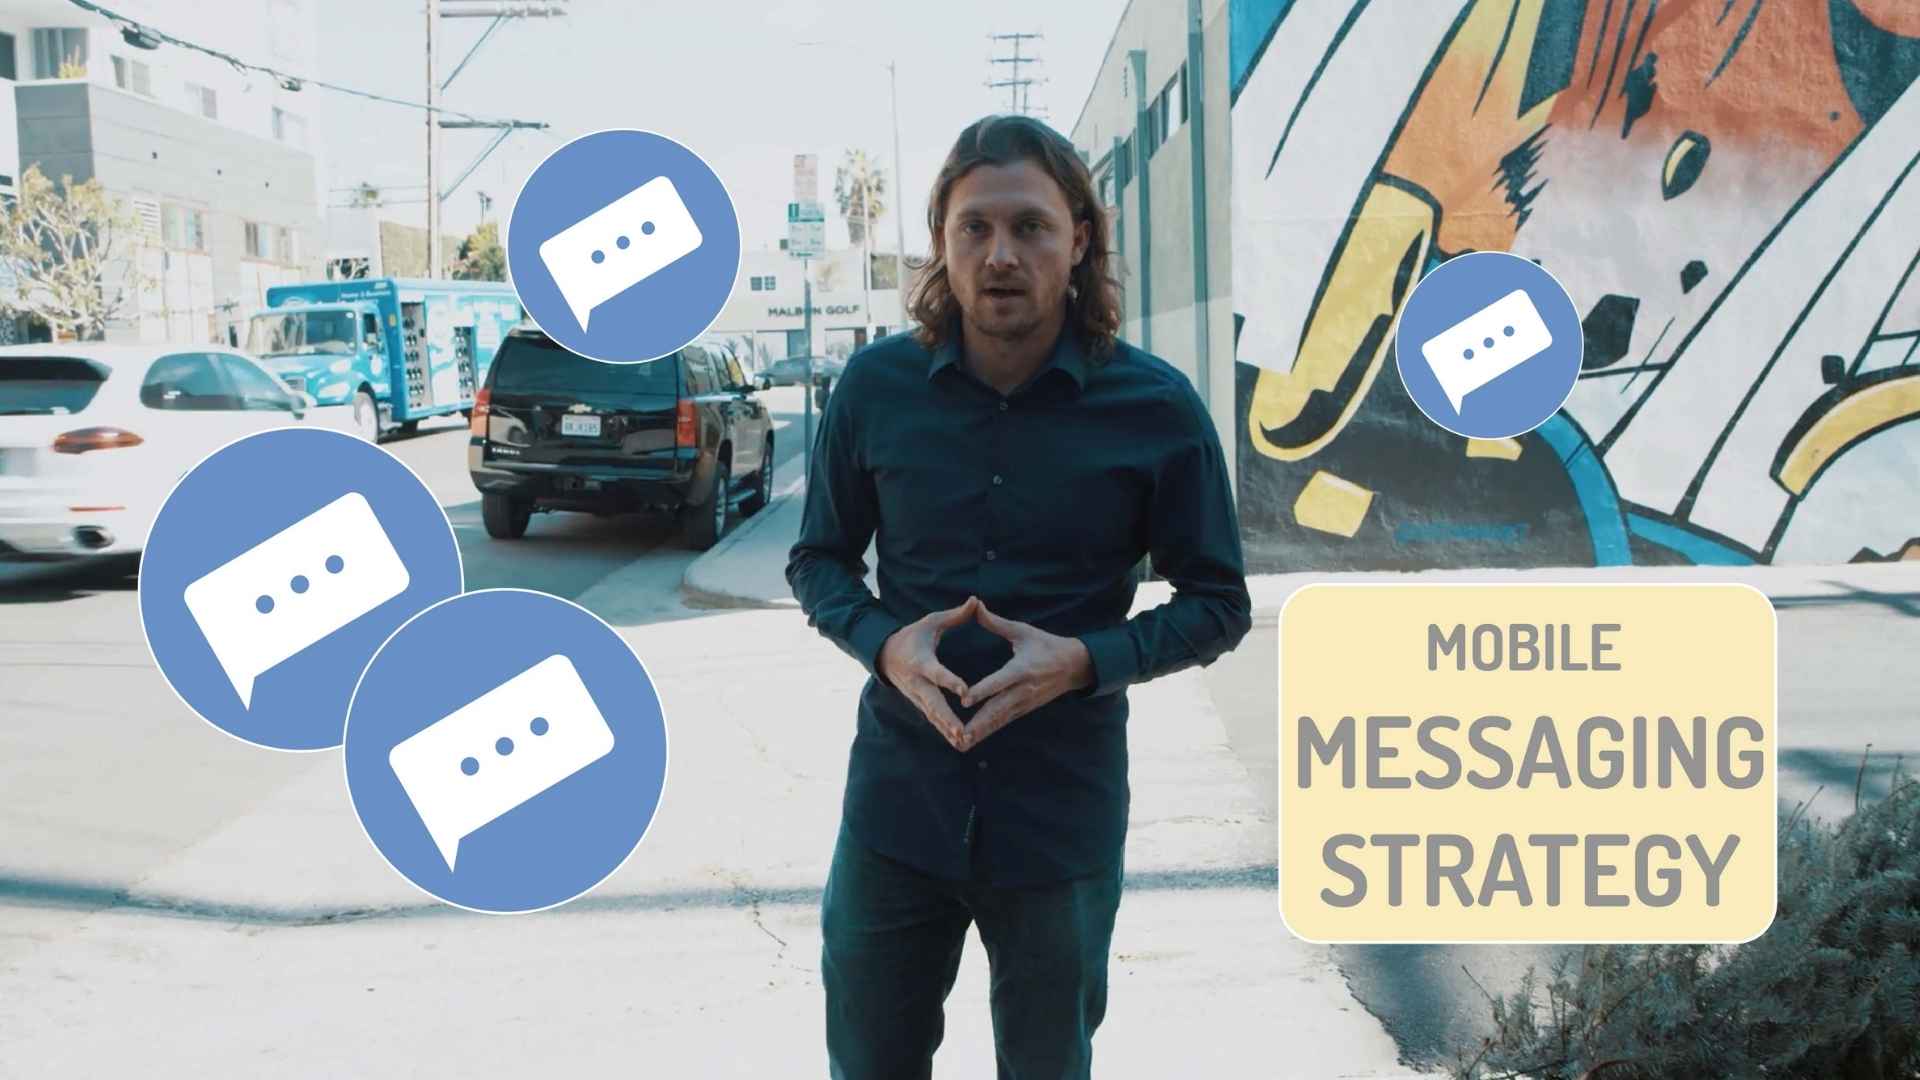 Mobile messaging strategy - Marketing Video